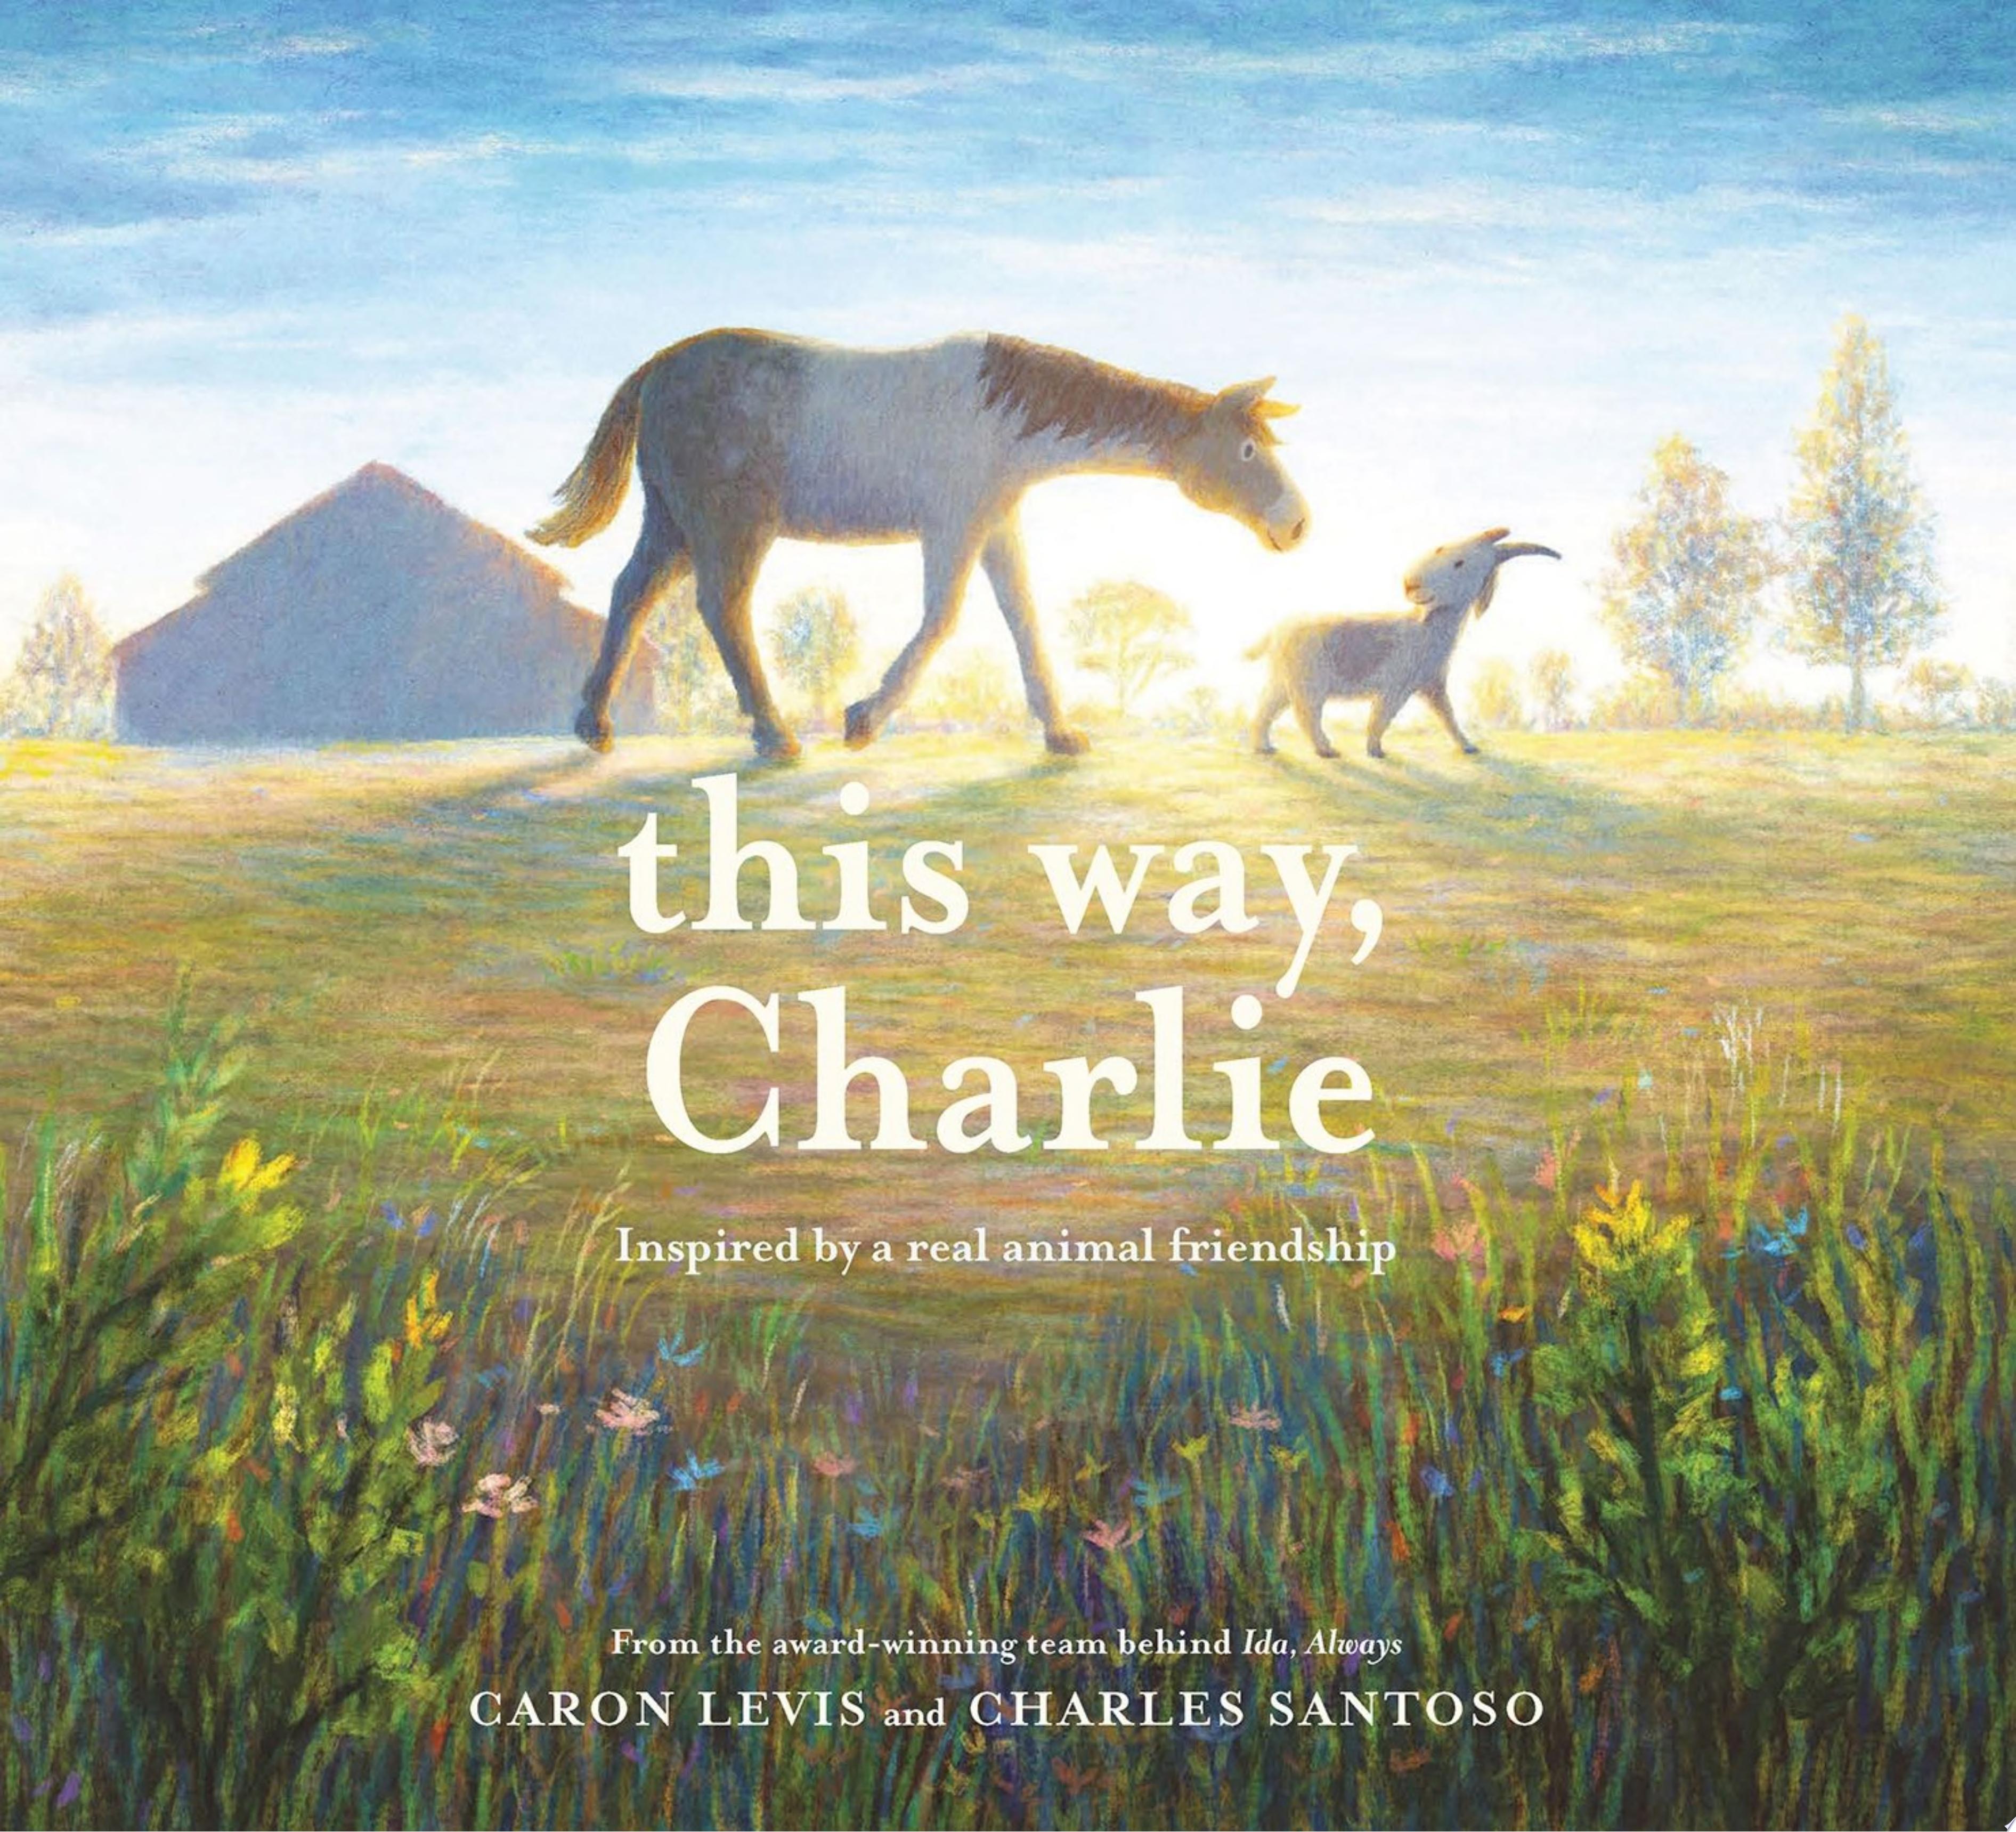 Image for "This Way, Charlie"